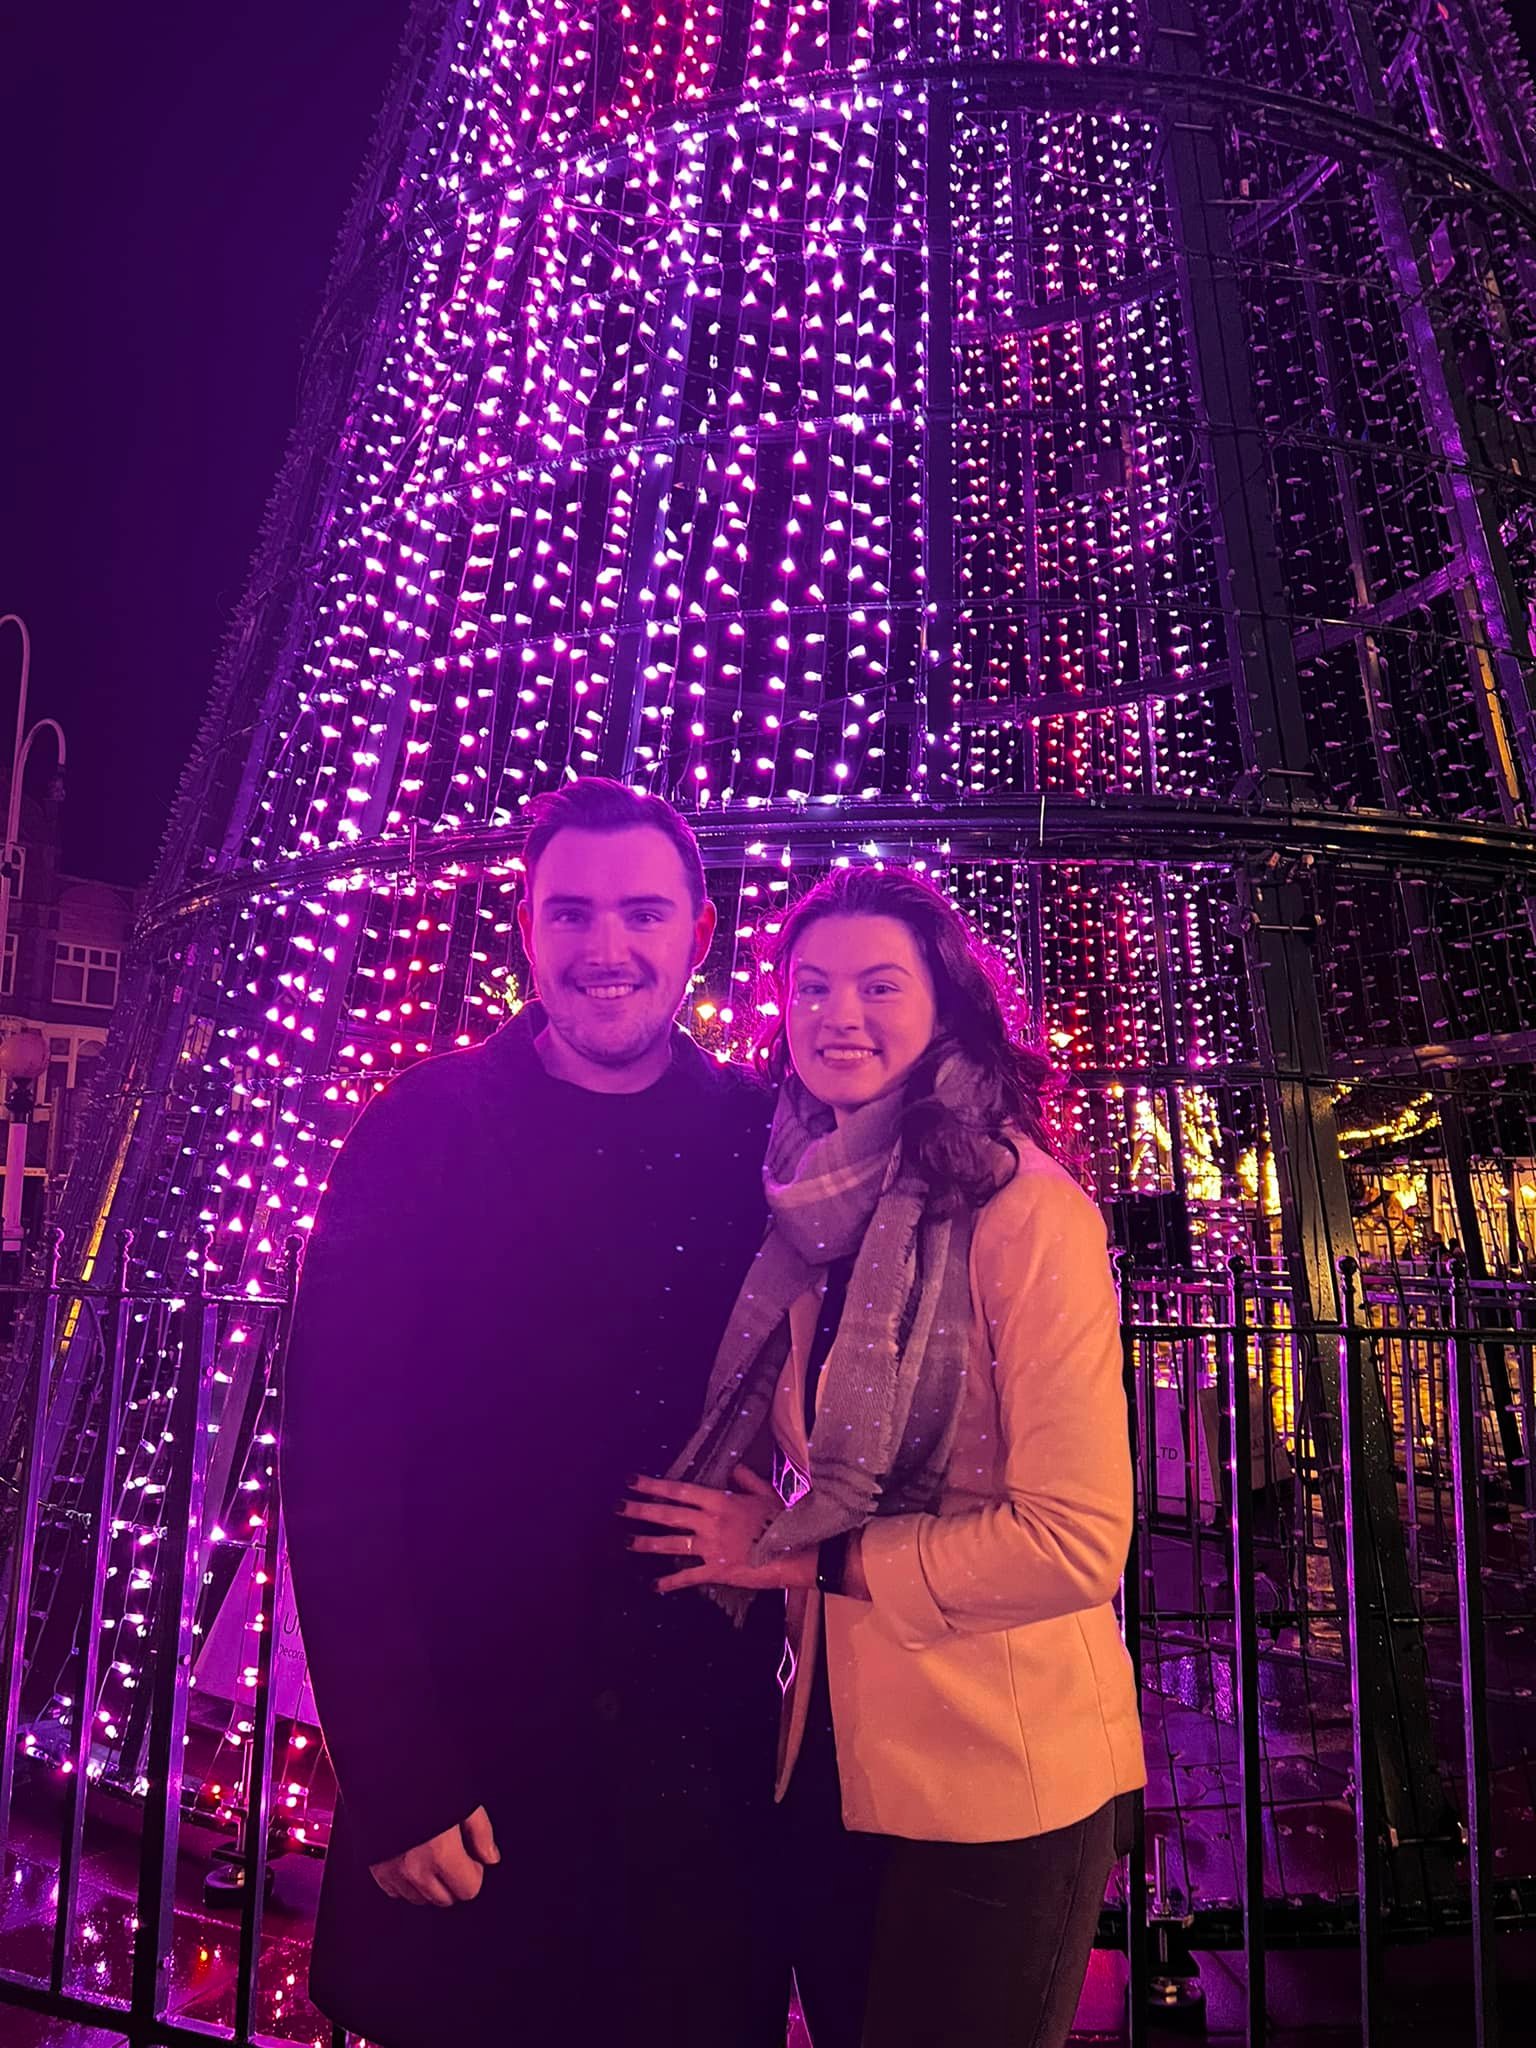 Ryan Wall and Sadie Farrington got engaged next to Southport's sparking Christmas tree, after enjoying their first date there